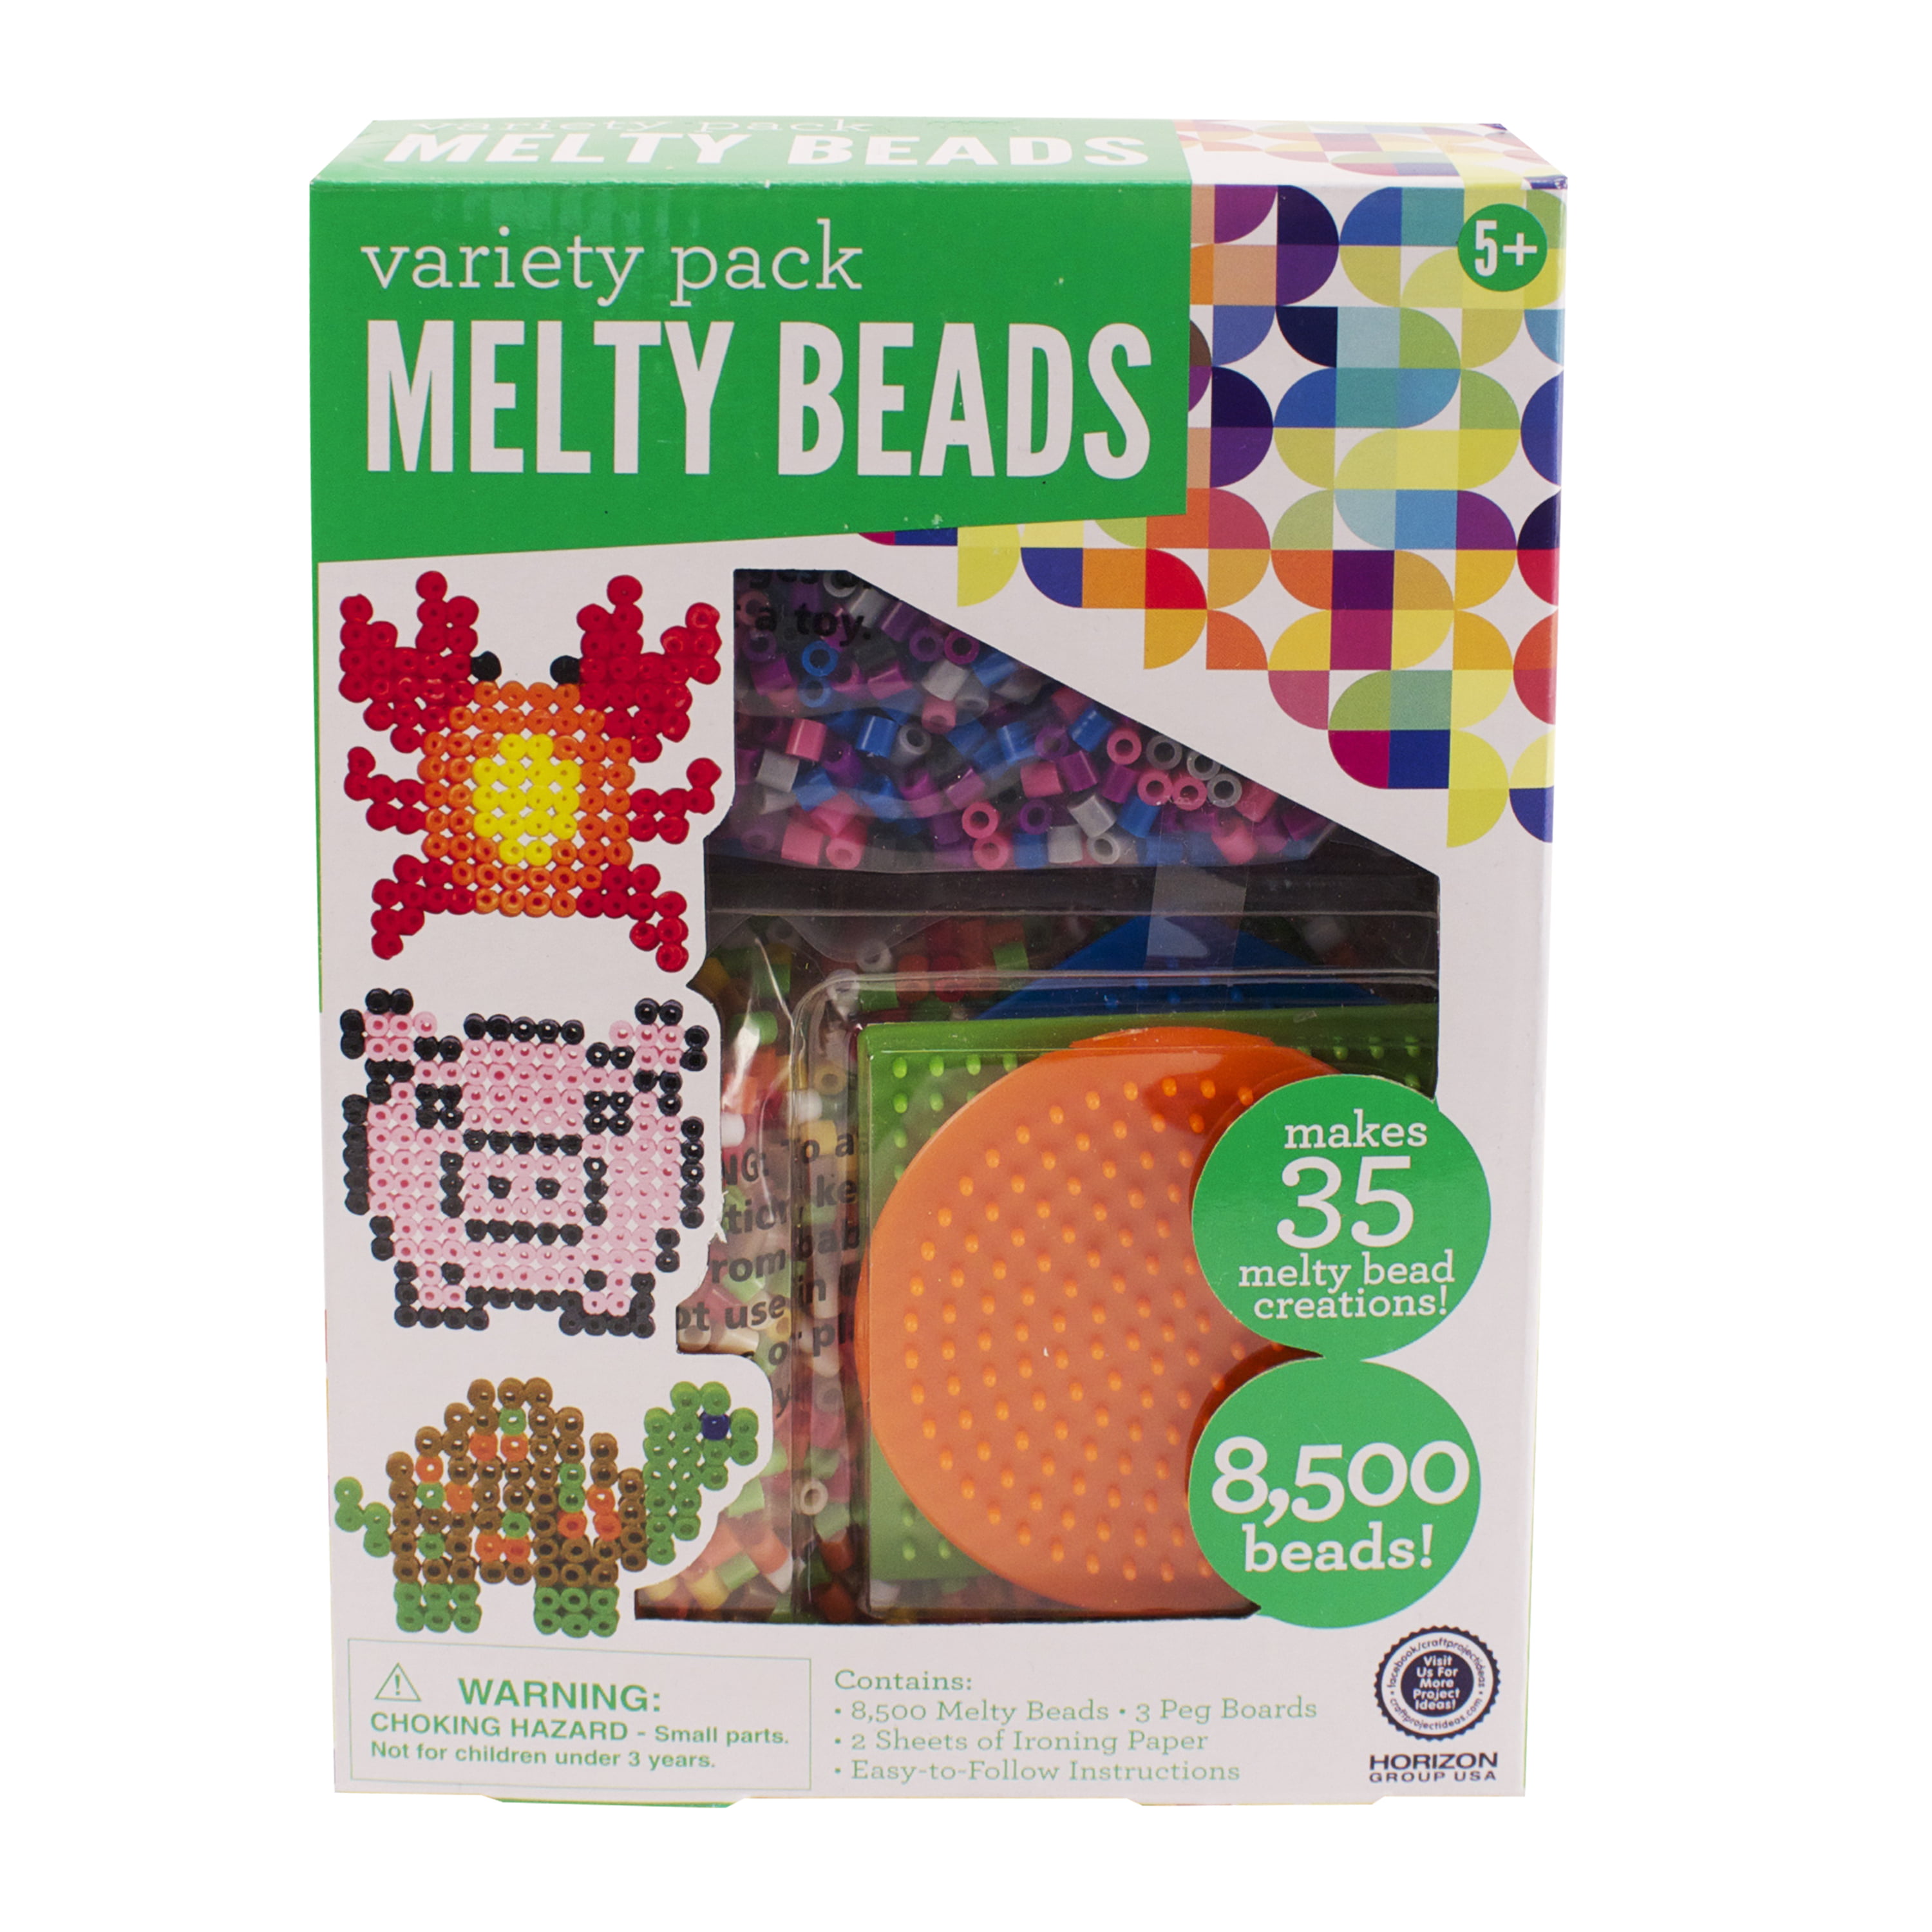 Heat And Fuse Melty Beads Craft 2-Pack, Five Below